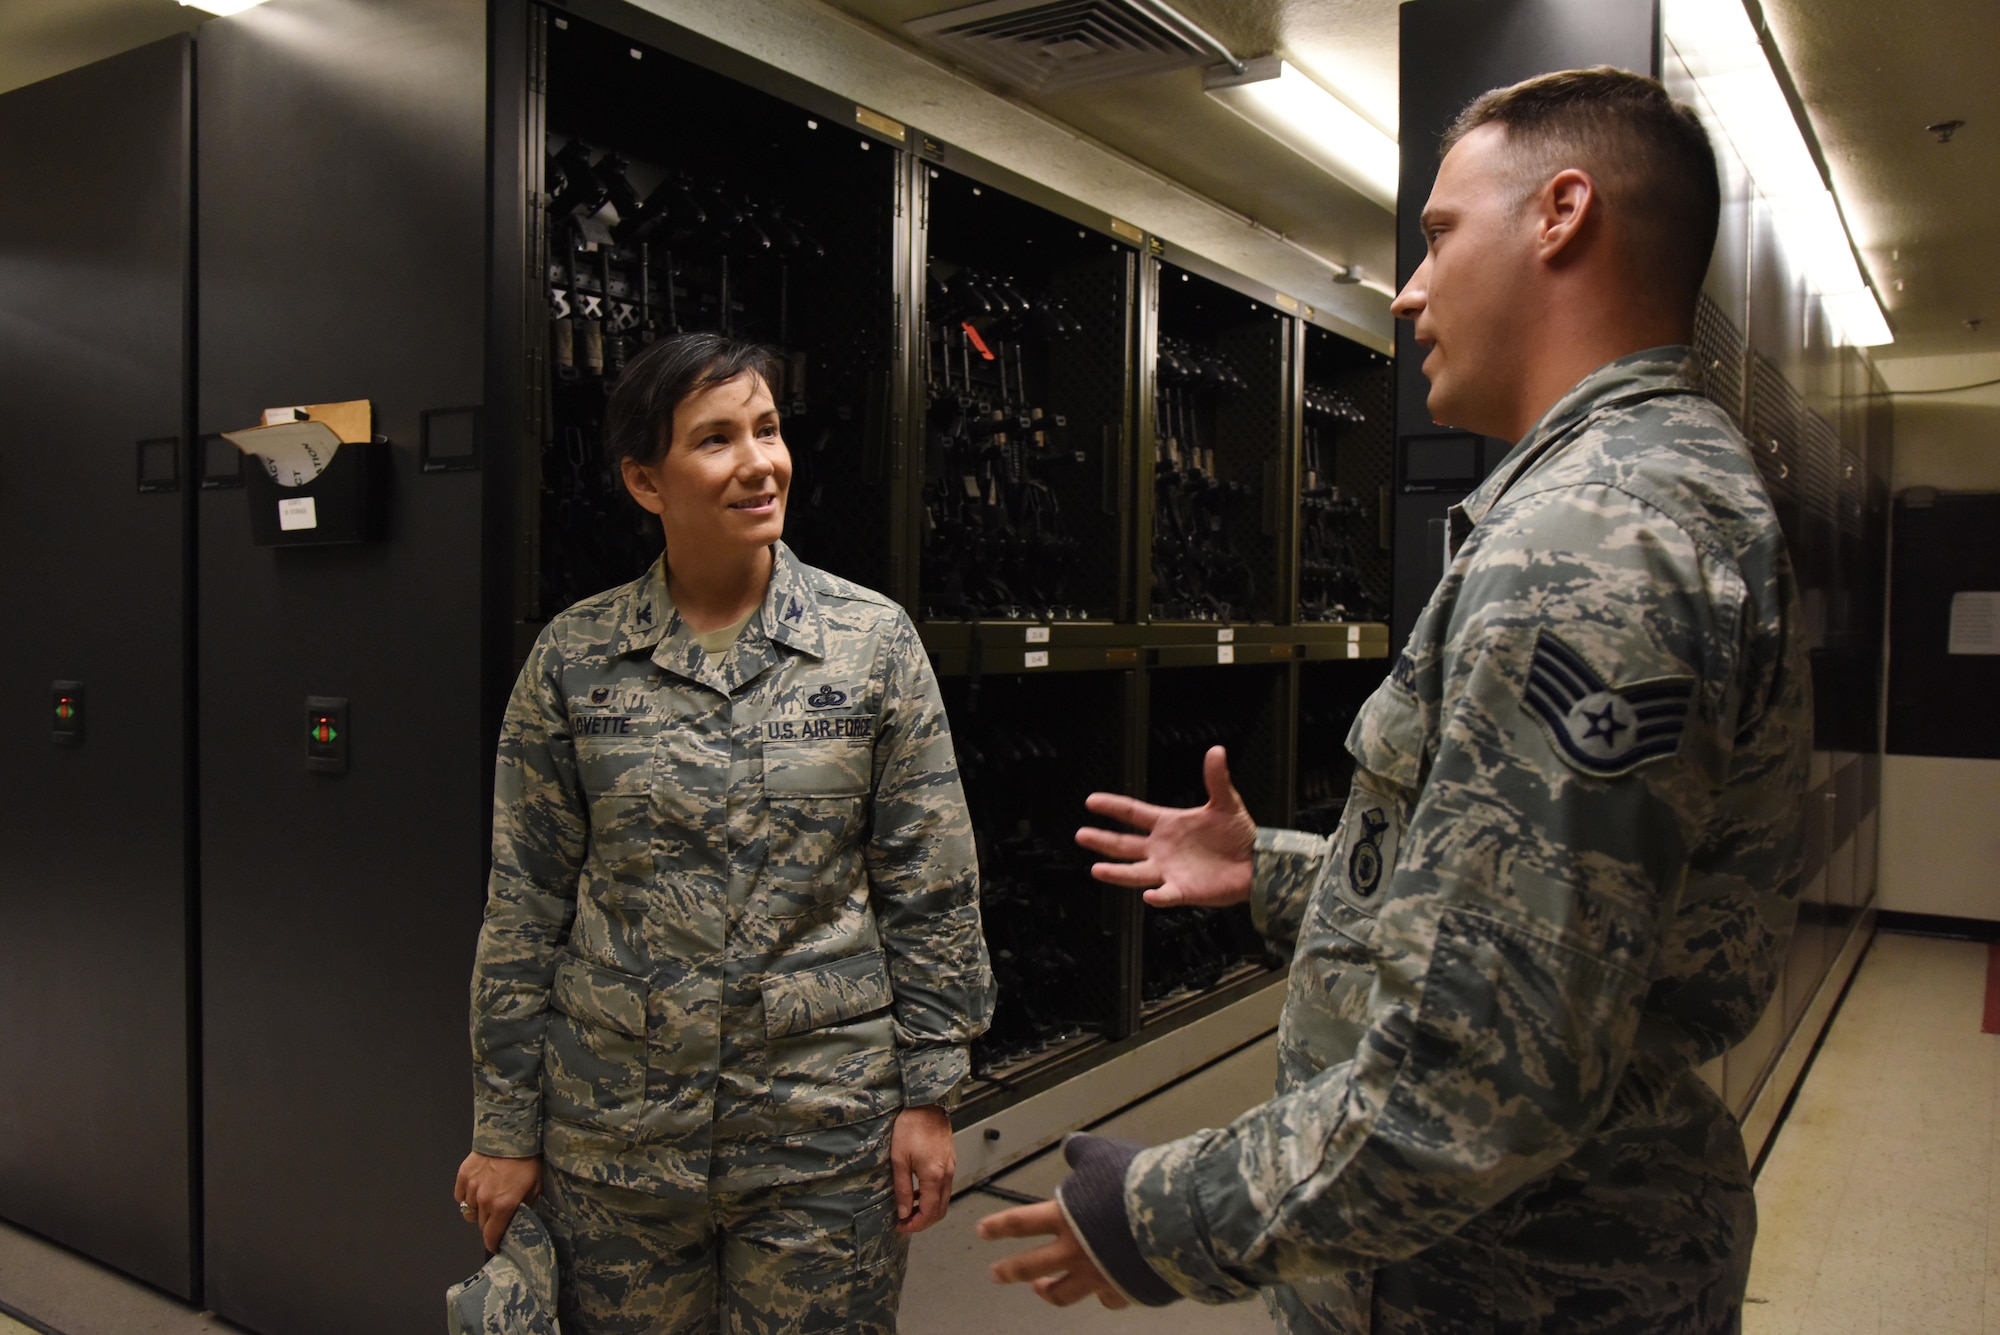 Staff Sgt. Matthew Keel, 81st Security Forces Squadron combat arms instructor, provides a tour of the armory to Col. Debra Lovette, 81st Training Wing commander, at the 81st SFS building during a 81st Mission Support Group orientation tour June 29, 2017, on Keesler Air Force Base, Miss. The tour familiarized Lovette with the group’s mission, operations and personnel. (U.S. Air Force photo by Kemberly Groue)